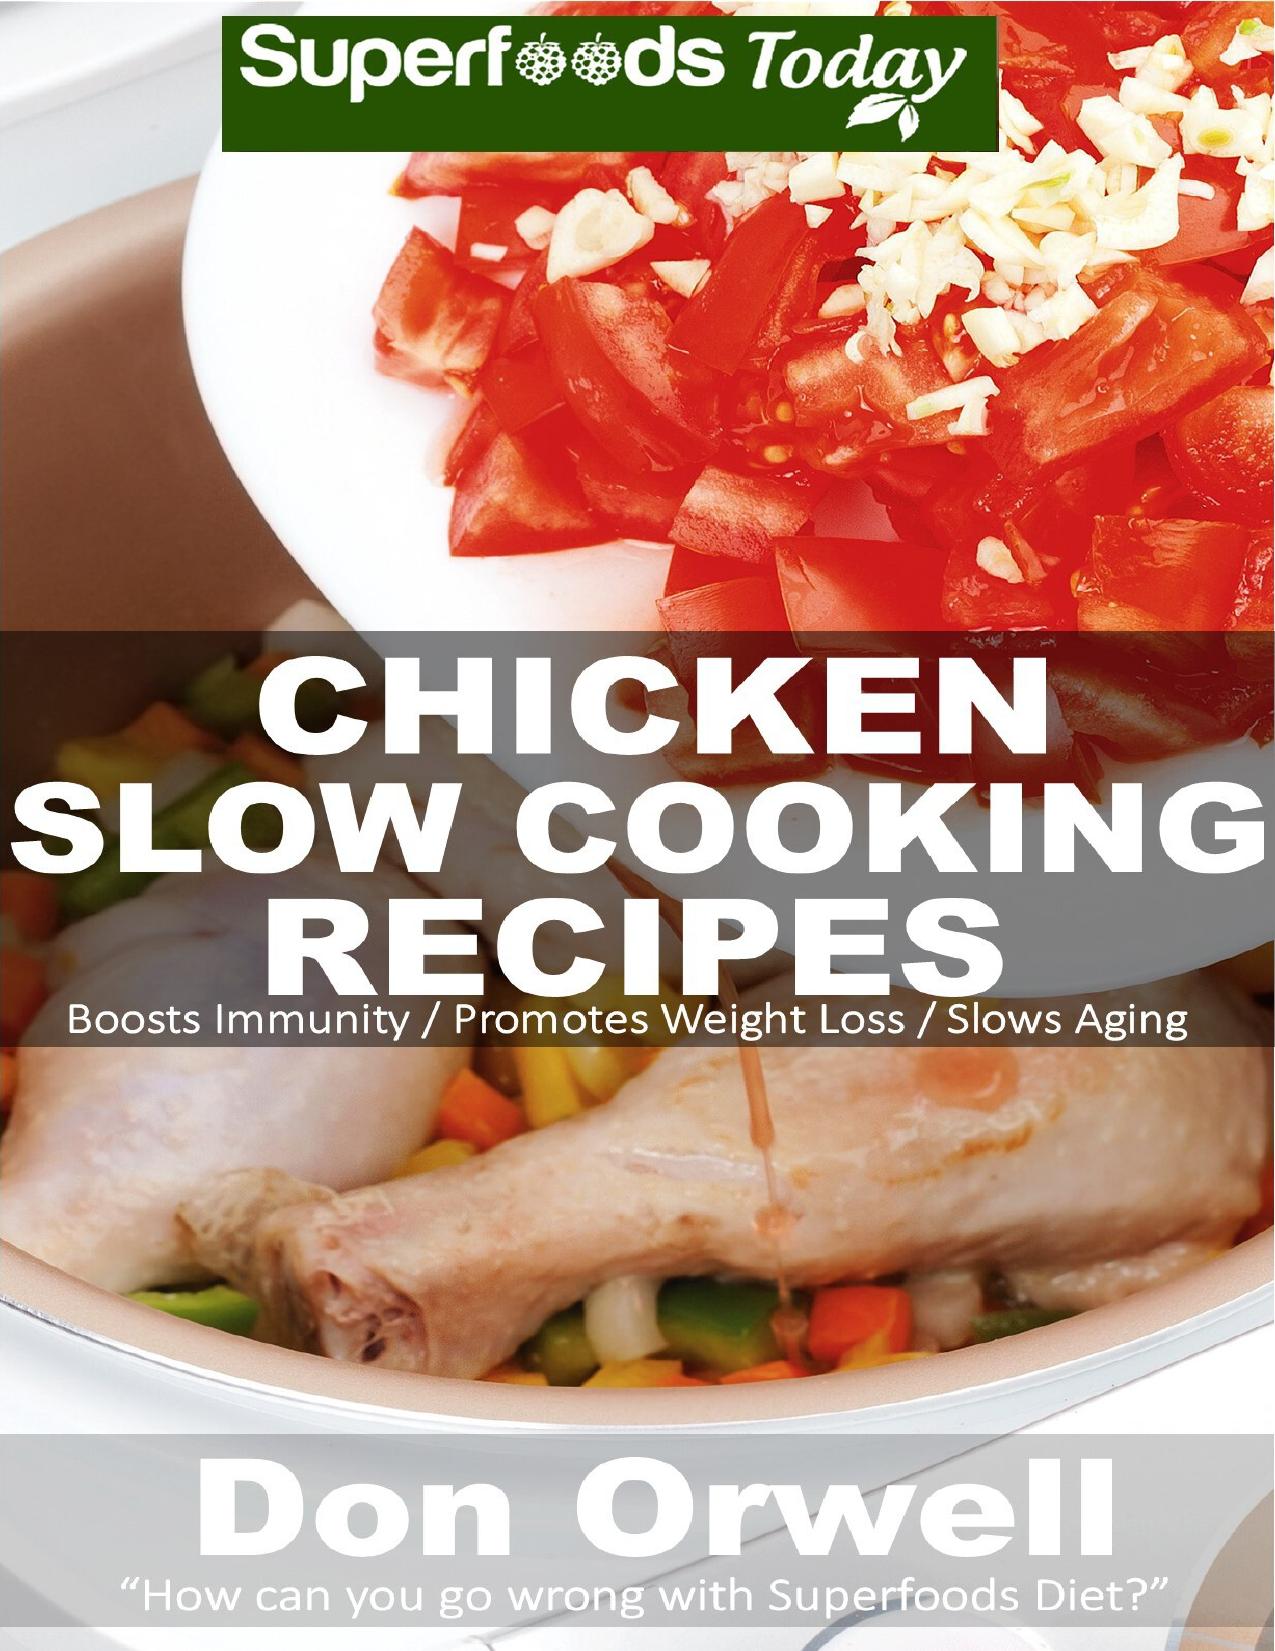 Chicken Slow Cooking Recipes: Over 50 Low Carb Slow Cooker Chicken Recipes full o Dump Dinners Recipes and Quick & Easy Cooking Recipes by Orwell Don